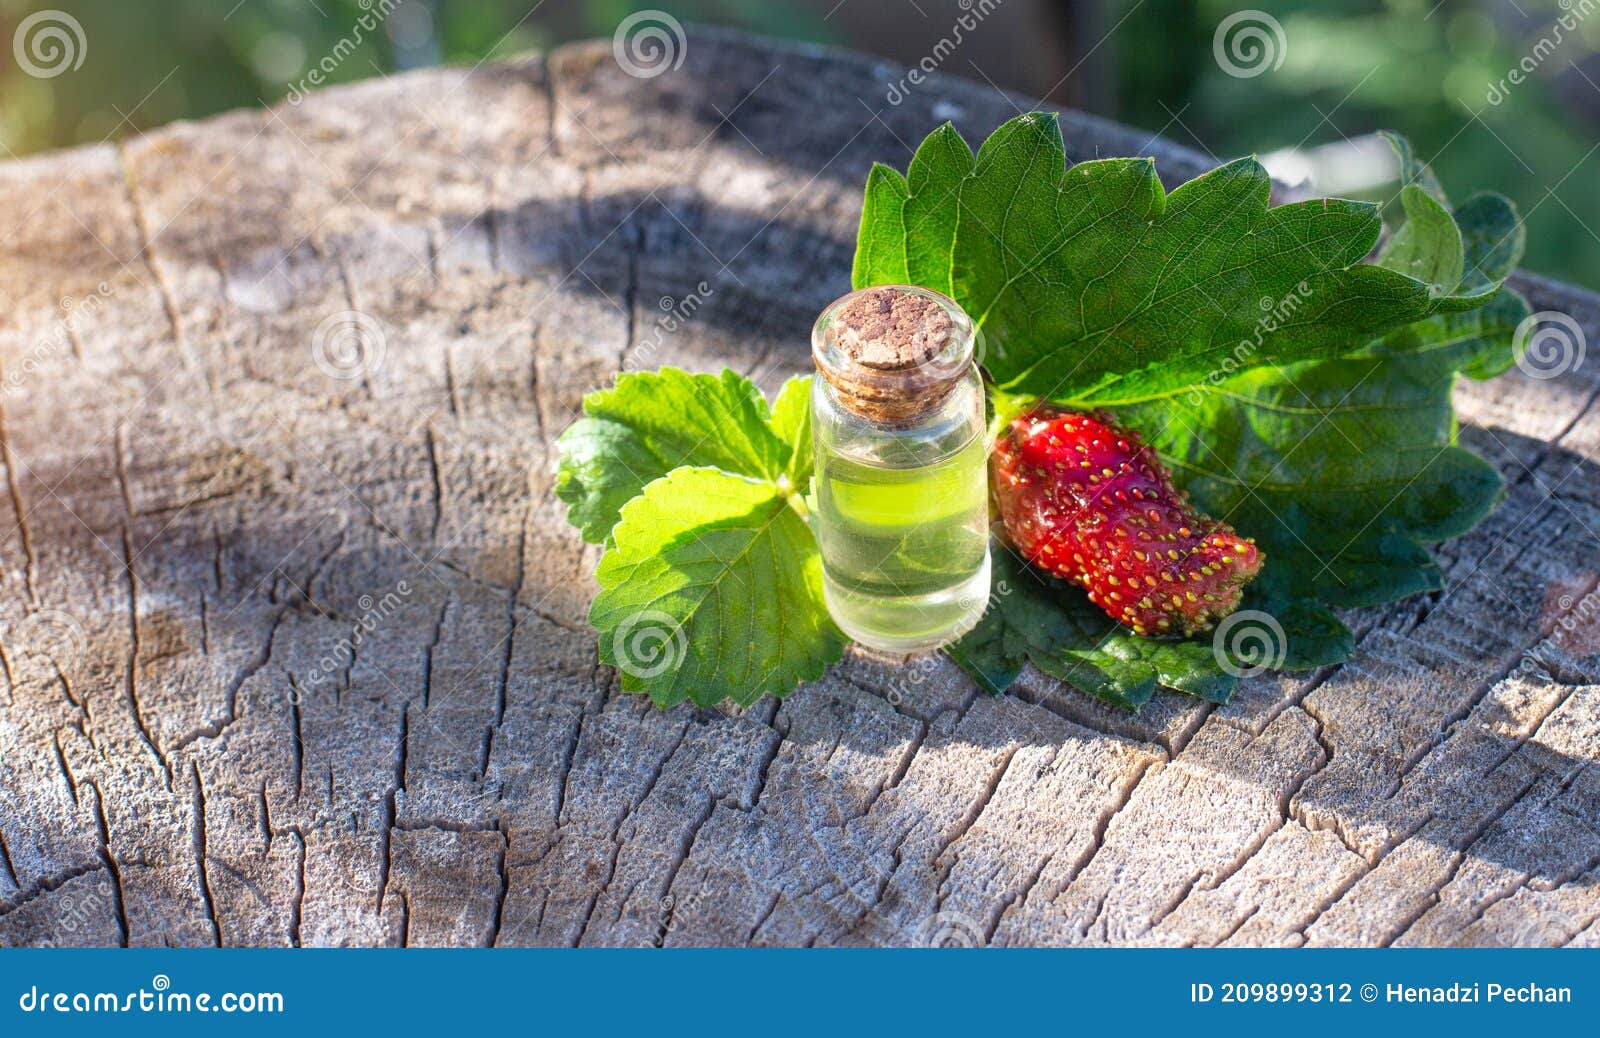 Bottle with Perfume from Strawberry Essential Oil on a Wooden